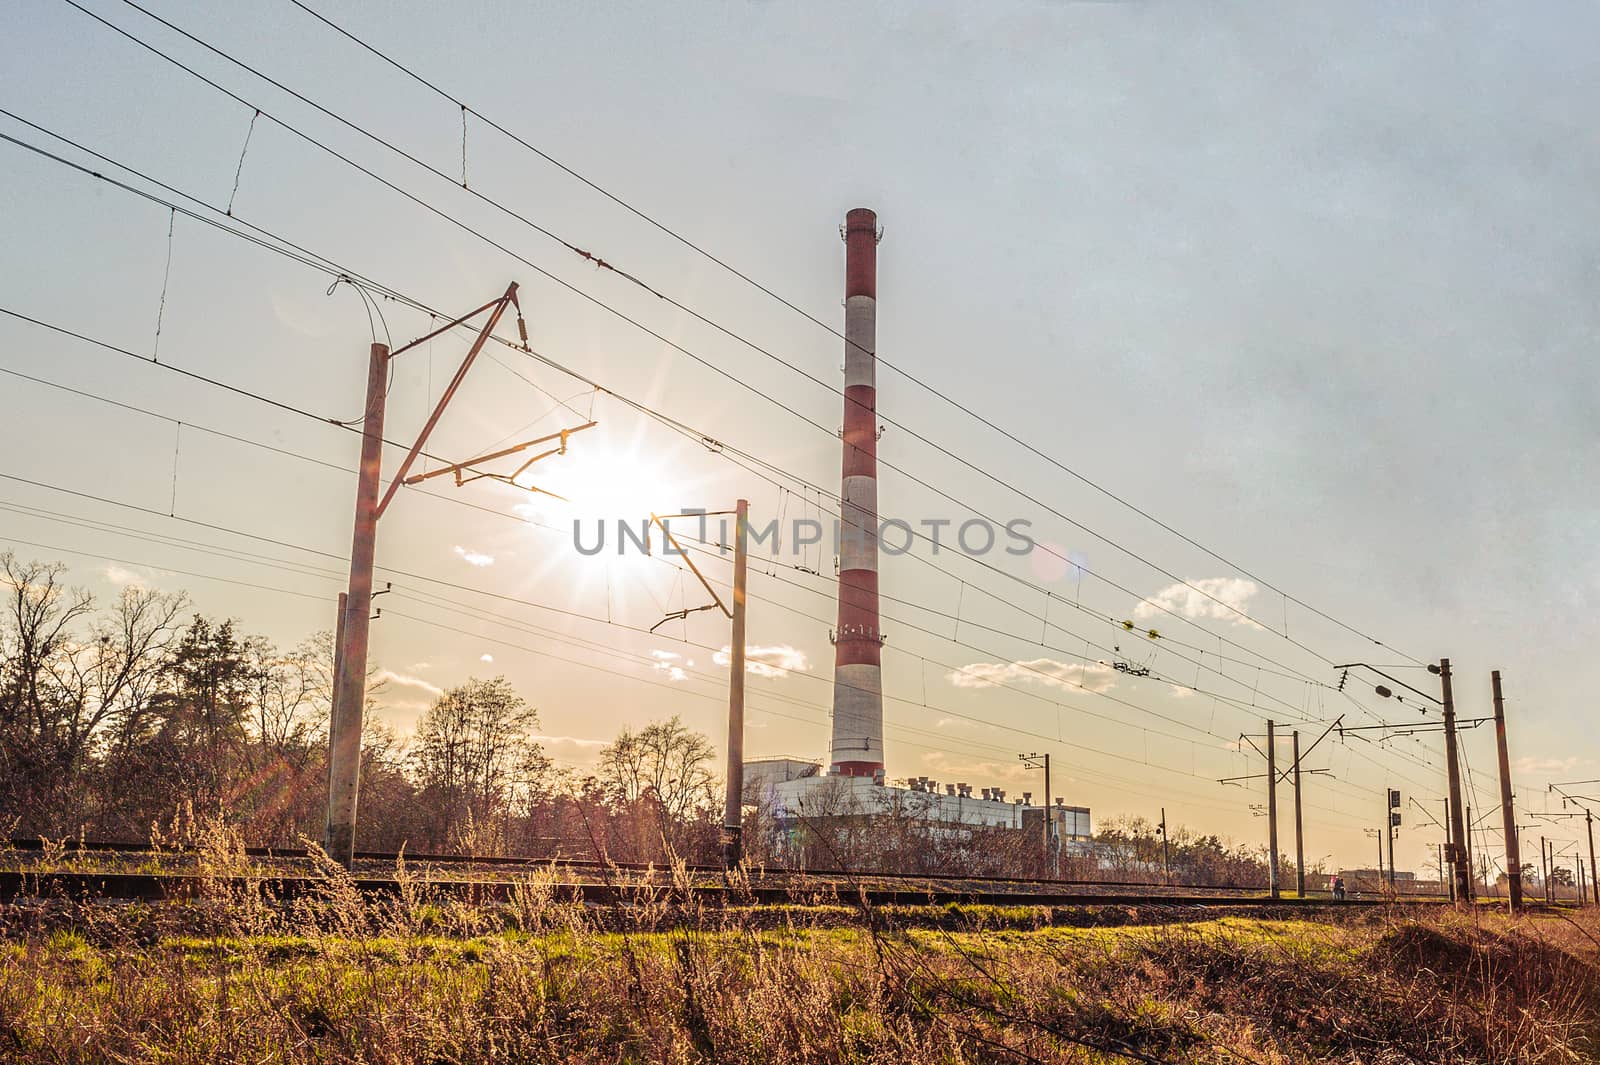 High pipe of thermal power station near the railway at sunset by chernobrovin